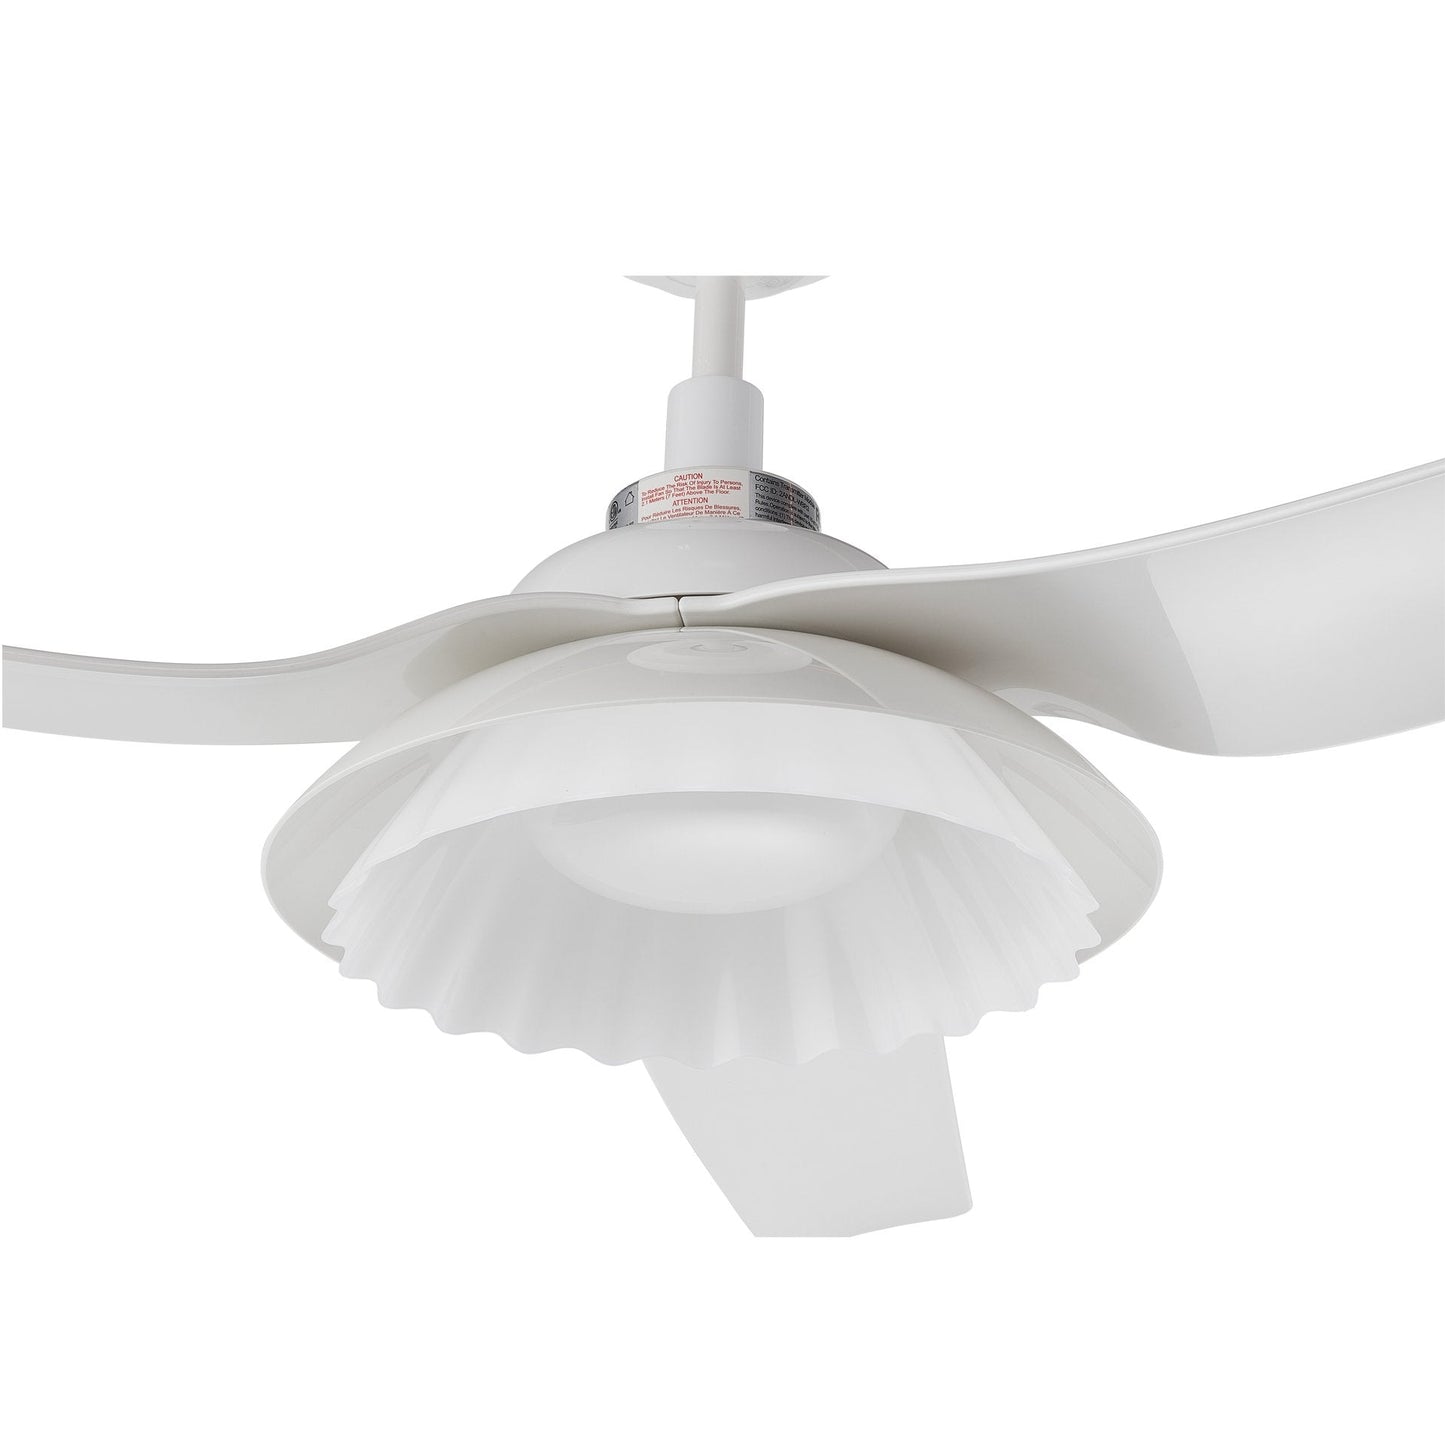 Daisy 52'' Best Smart Ceiling Fan with Remote, Light Kit Included, Works with Google Assistant and Amazon Alexa,Siri Shortcut